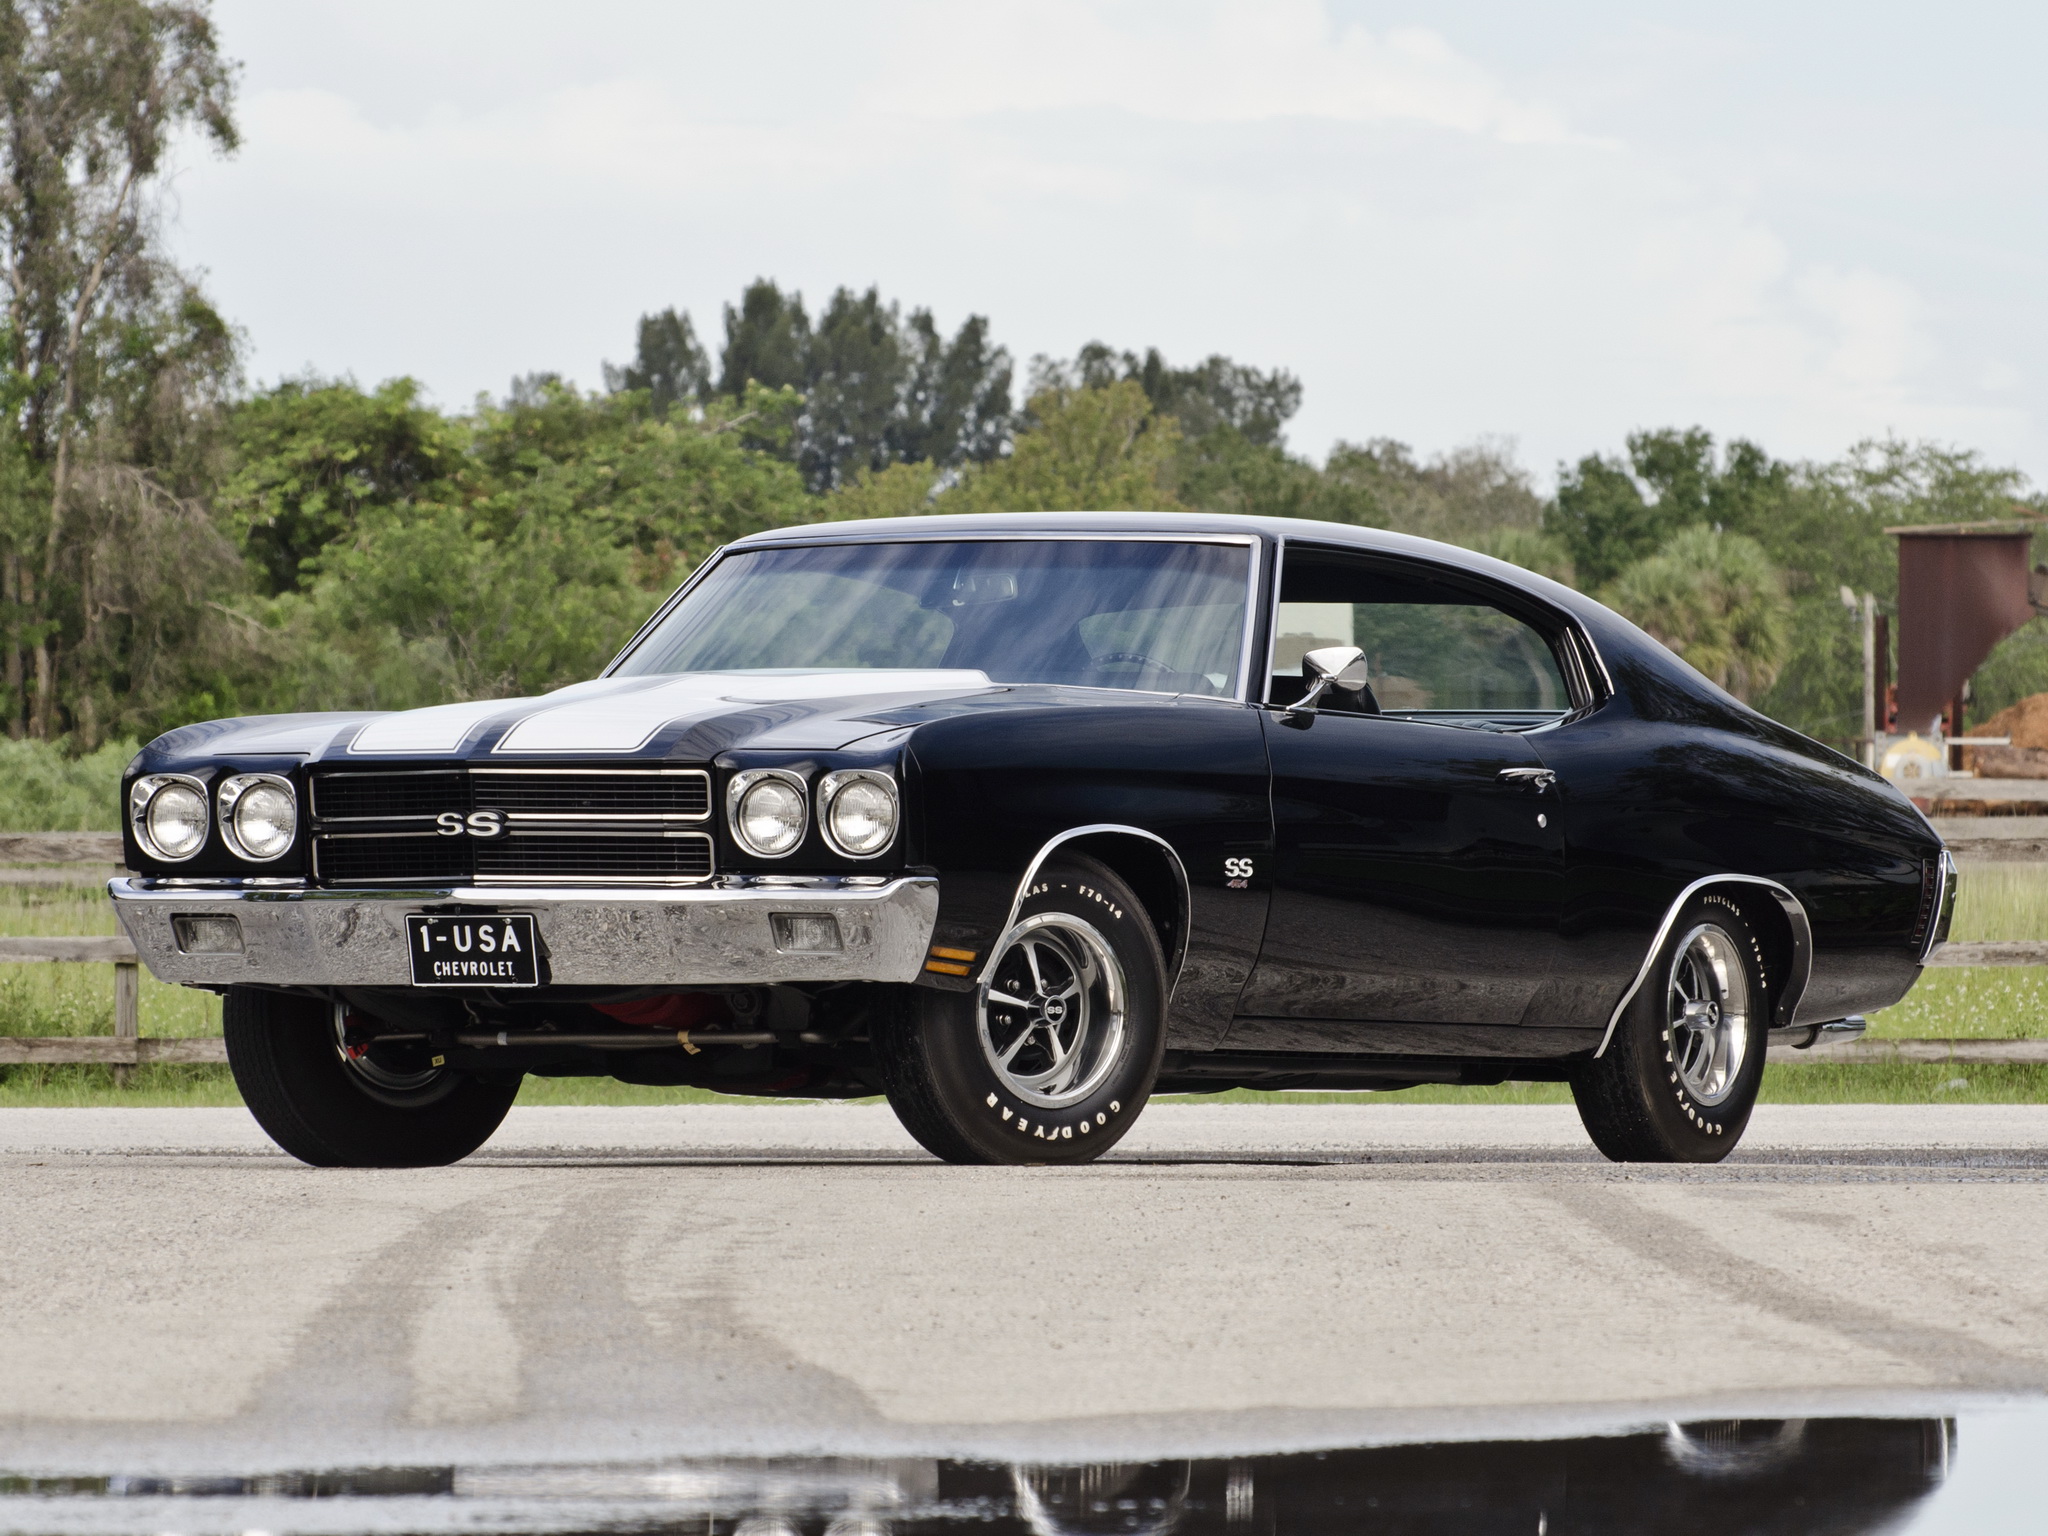 1970, Chevrolet, Chevelle, Ss, 454, Ls6, Hardtop, Coupe, Muscle, Classic, S s, Gs Wallpaper